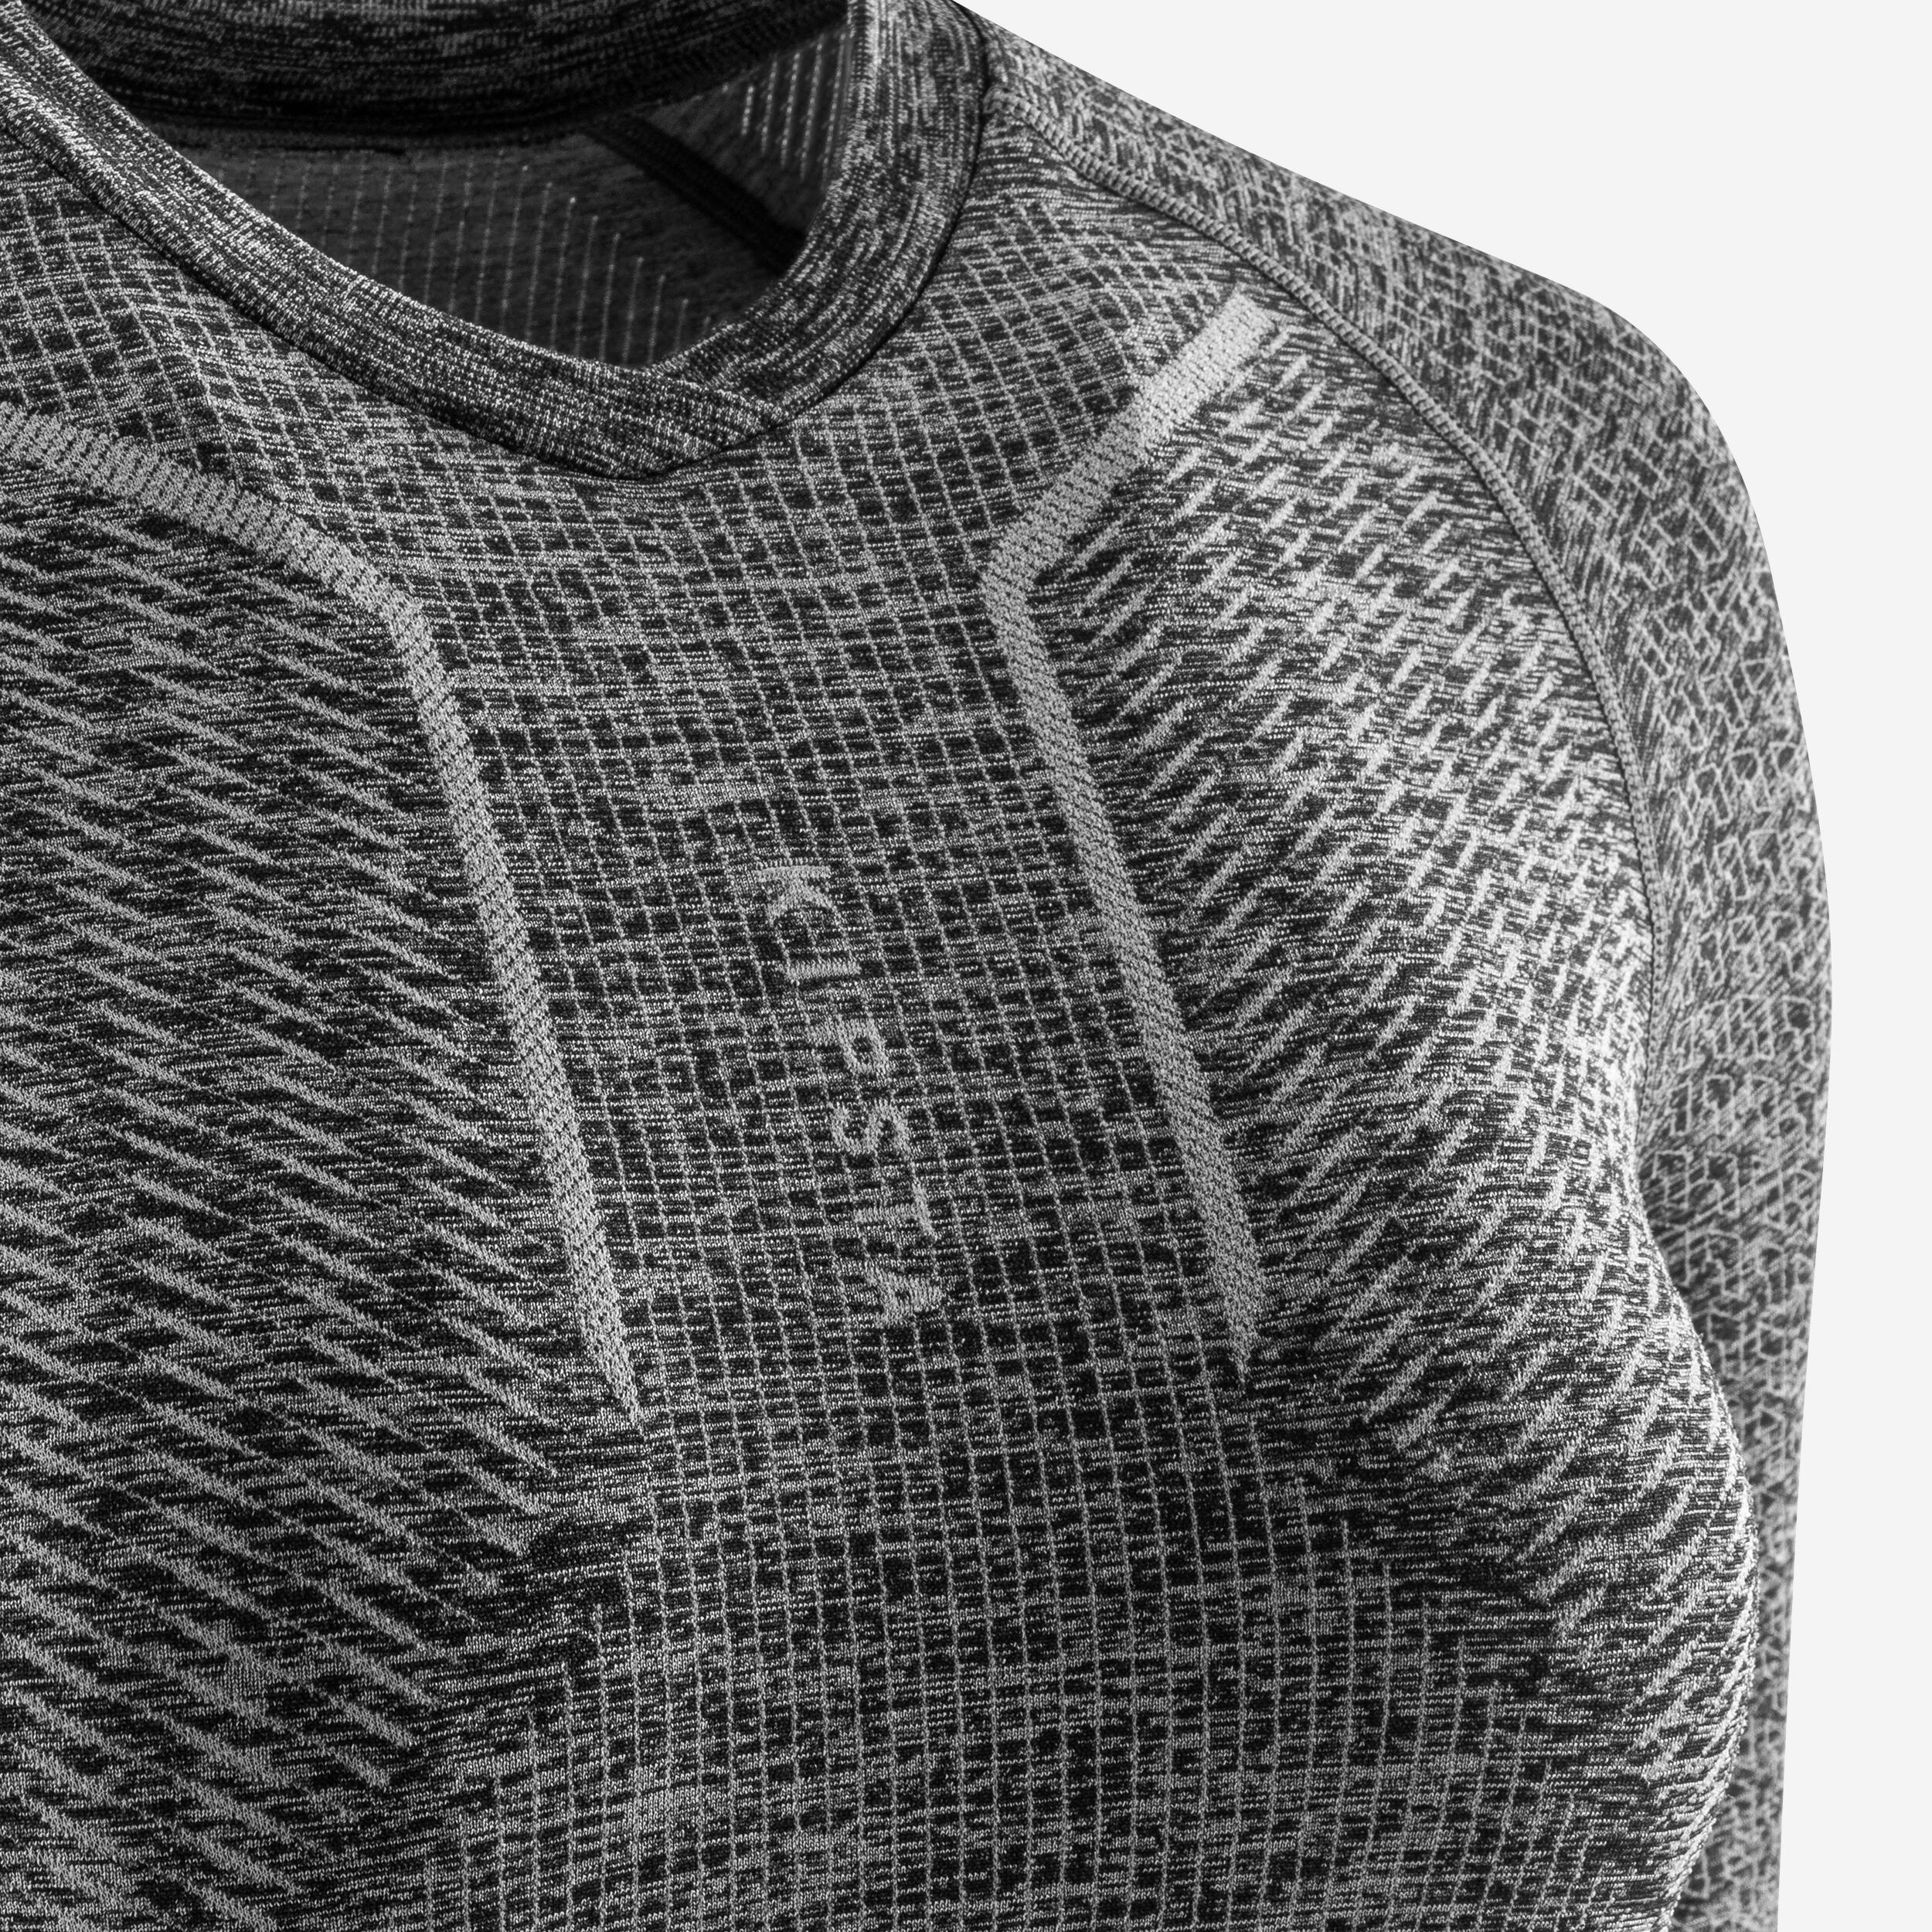 Adult Long-Sleeved Thermal Base Layer Top Keepdry 500 - Mottled Grey 8/10